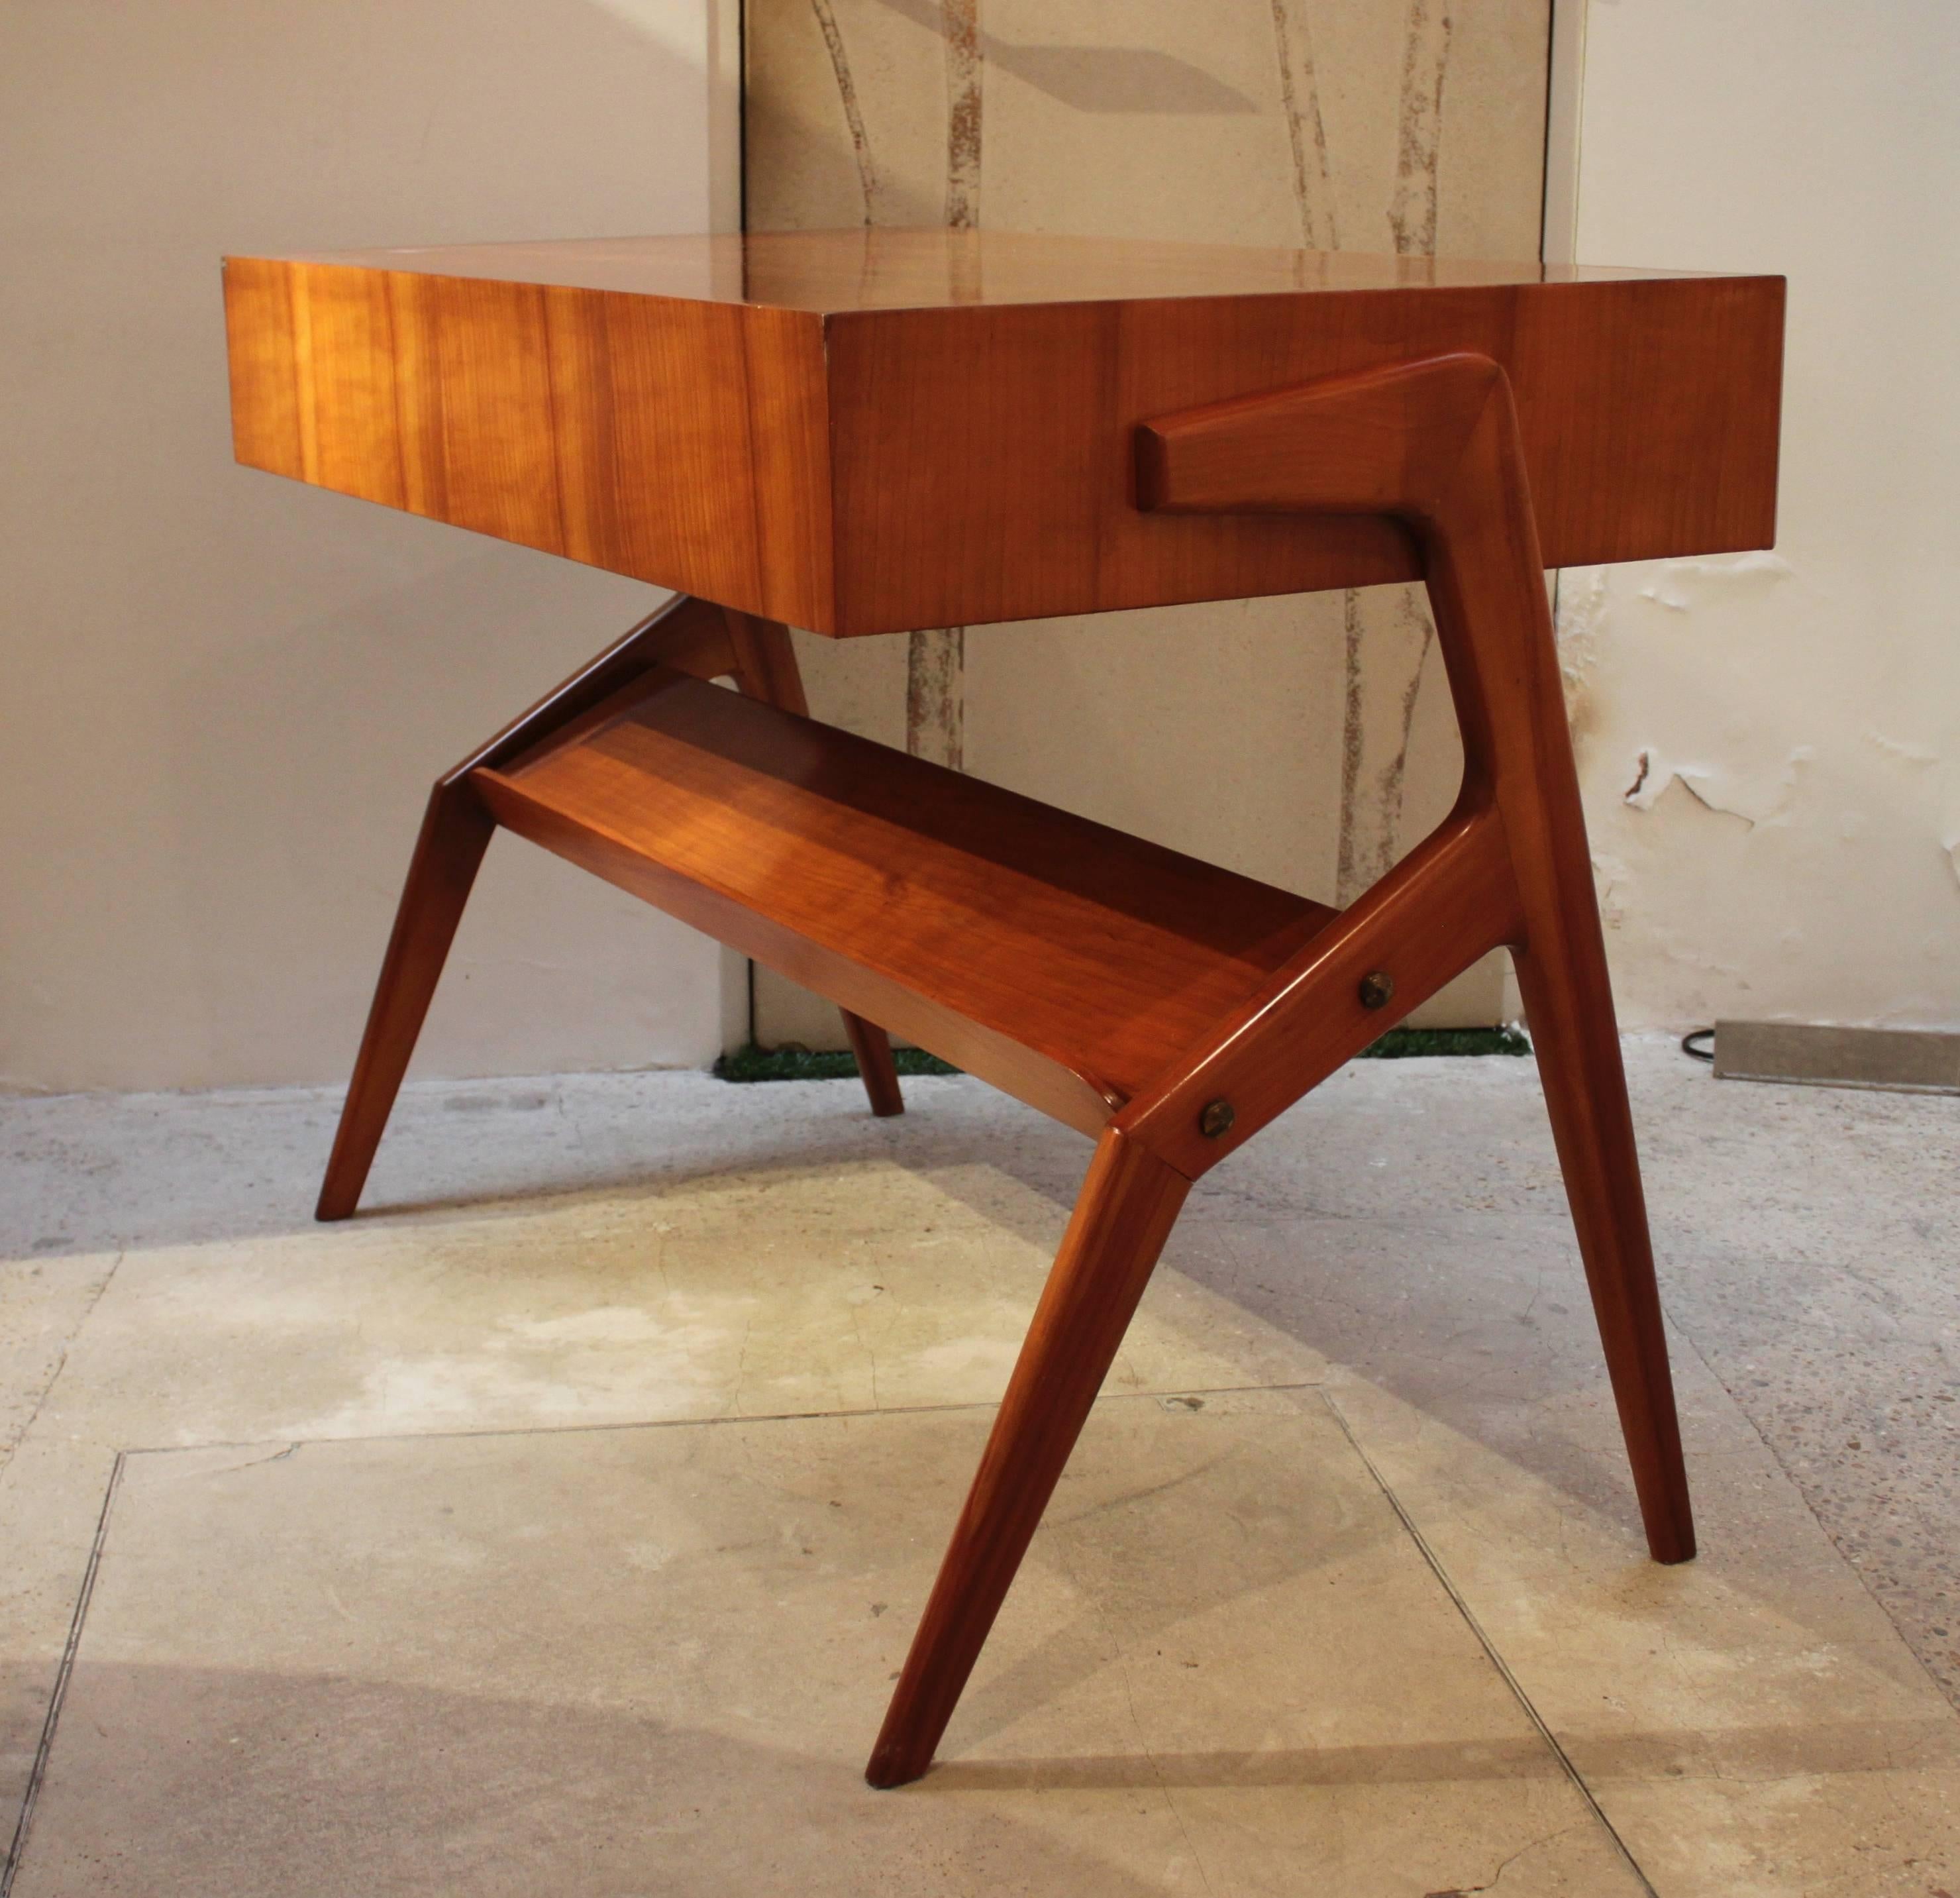 Small cherrywood desk with two reeded drawers and a low shelf.

In the style of Ico Parisi with the shaped legs and light design.

Italian, 1950s.